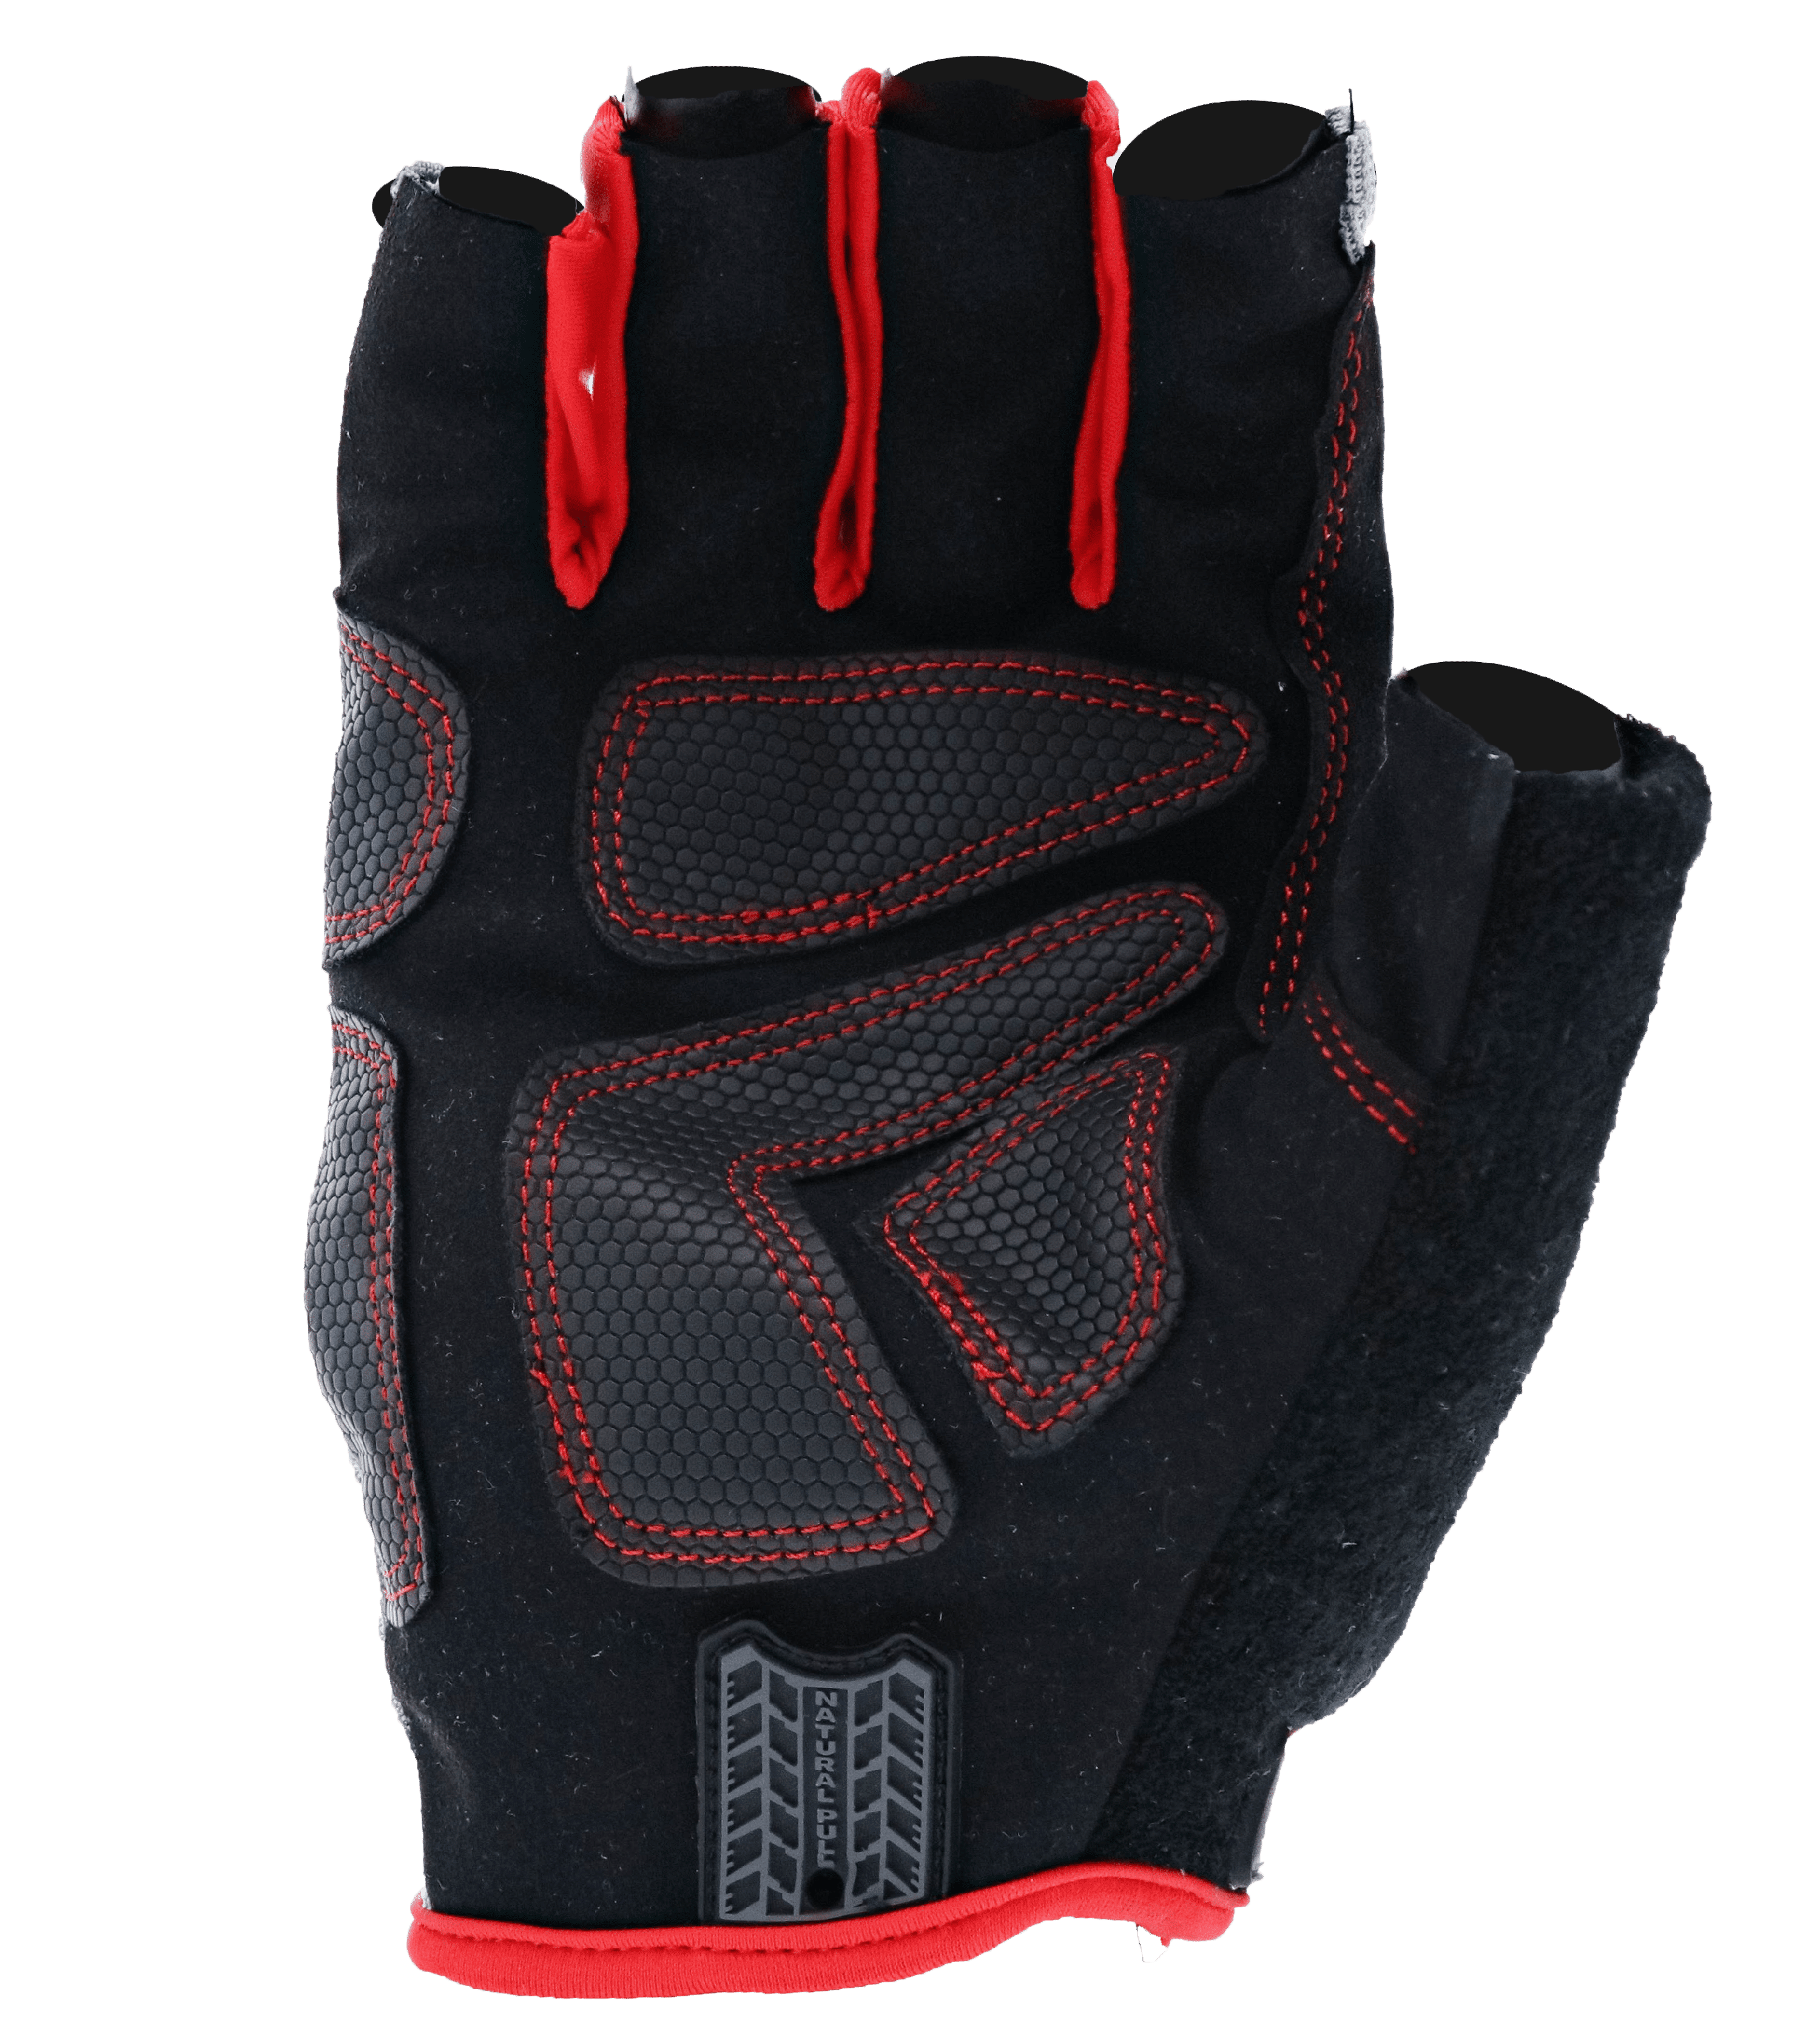 Grease Monkey Large Red, Gray Glove 25172-23